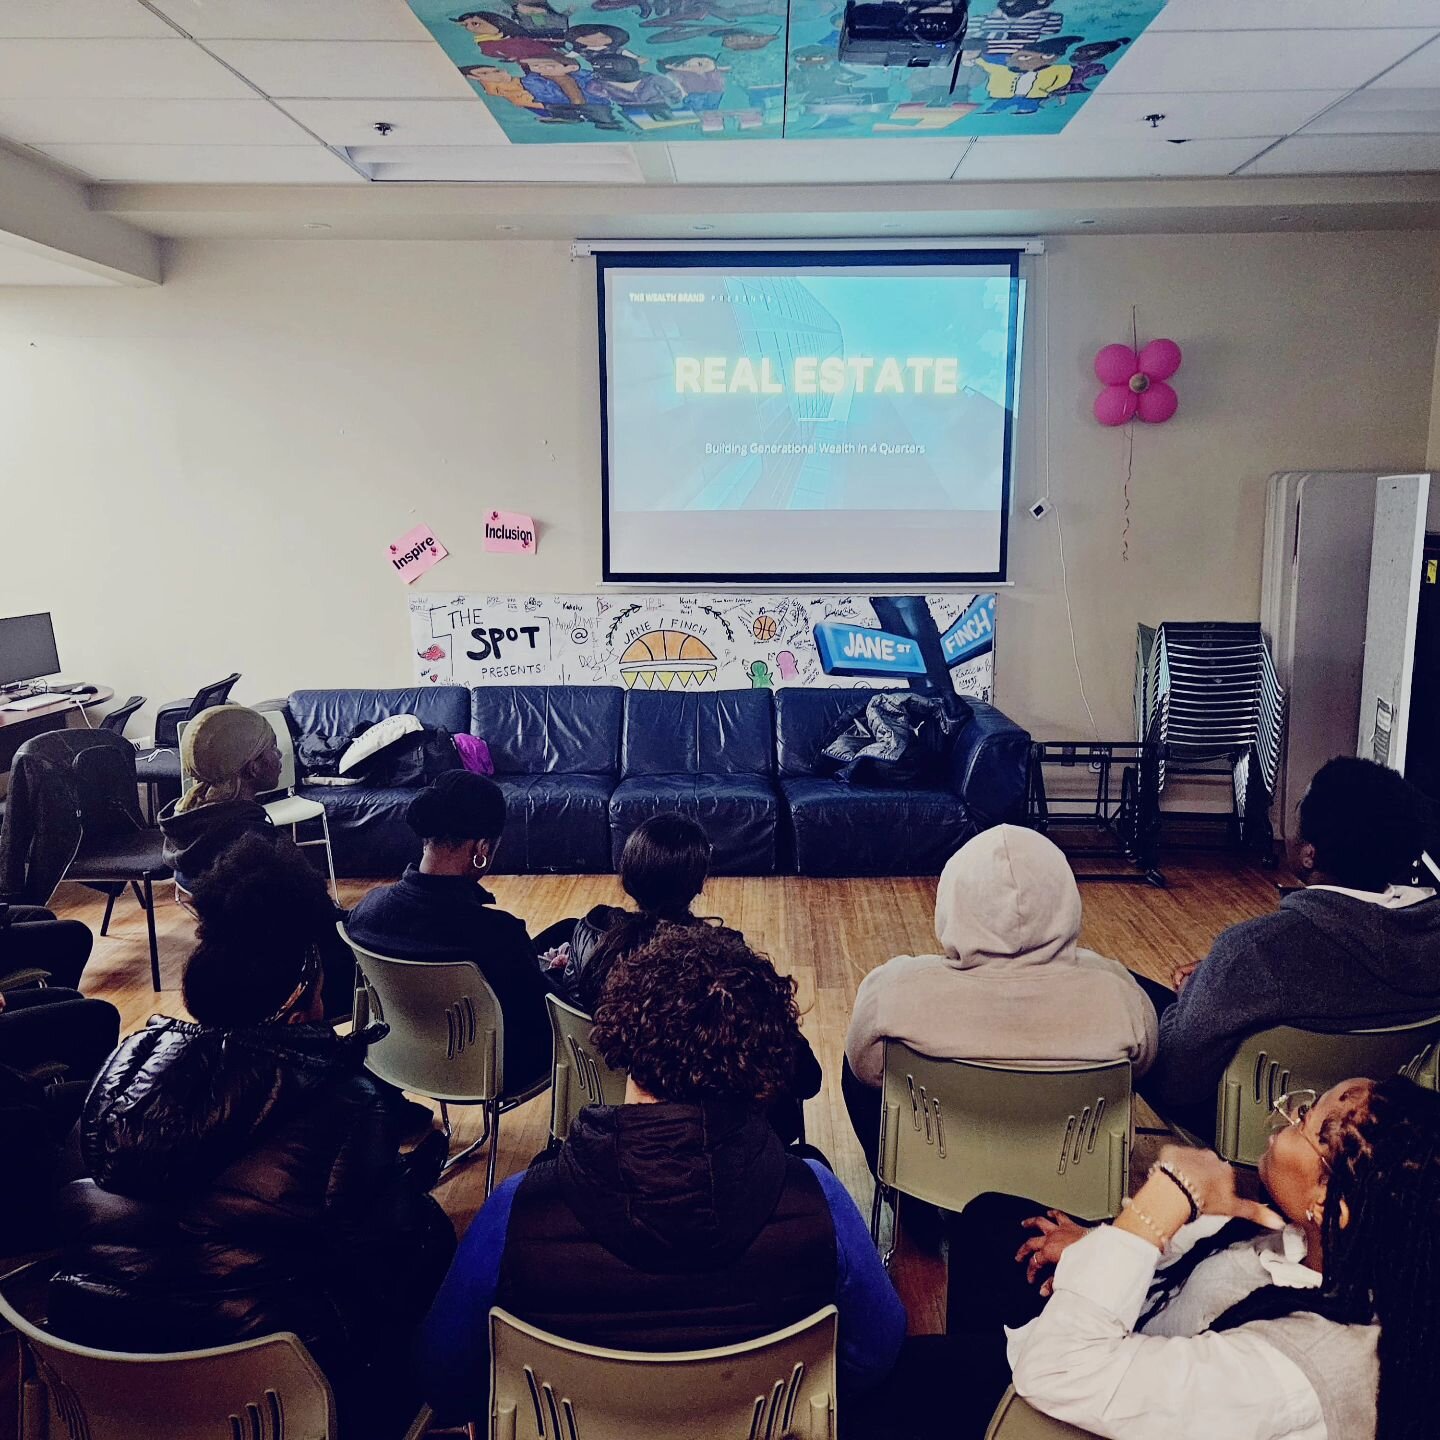 Thank you to @thespotyouthcentre for partnering with us to bring our Building Generational Wealth in 4 Quarters workshop to the youth.

This workshop, dives into the world of wealth-building using real-estate. Participants learn strategic insights fo